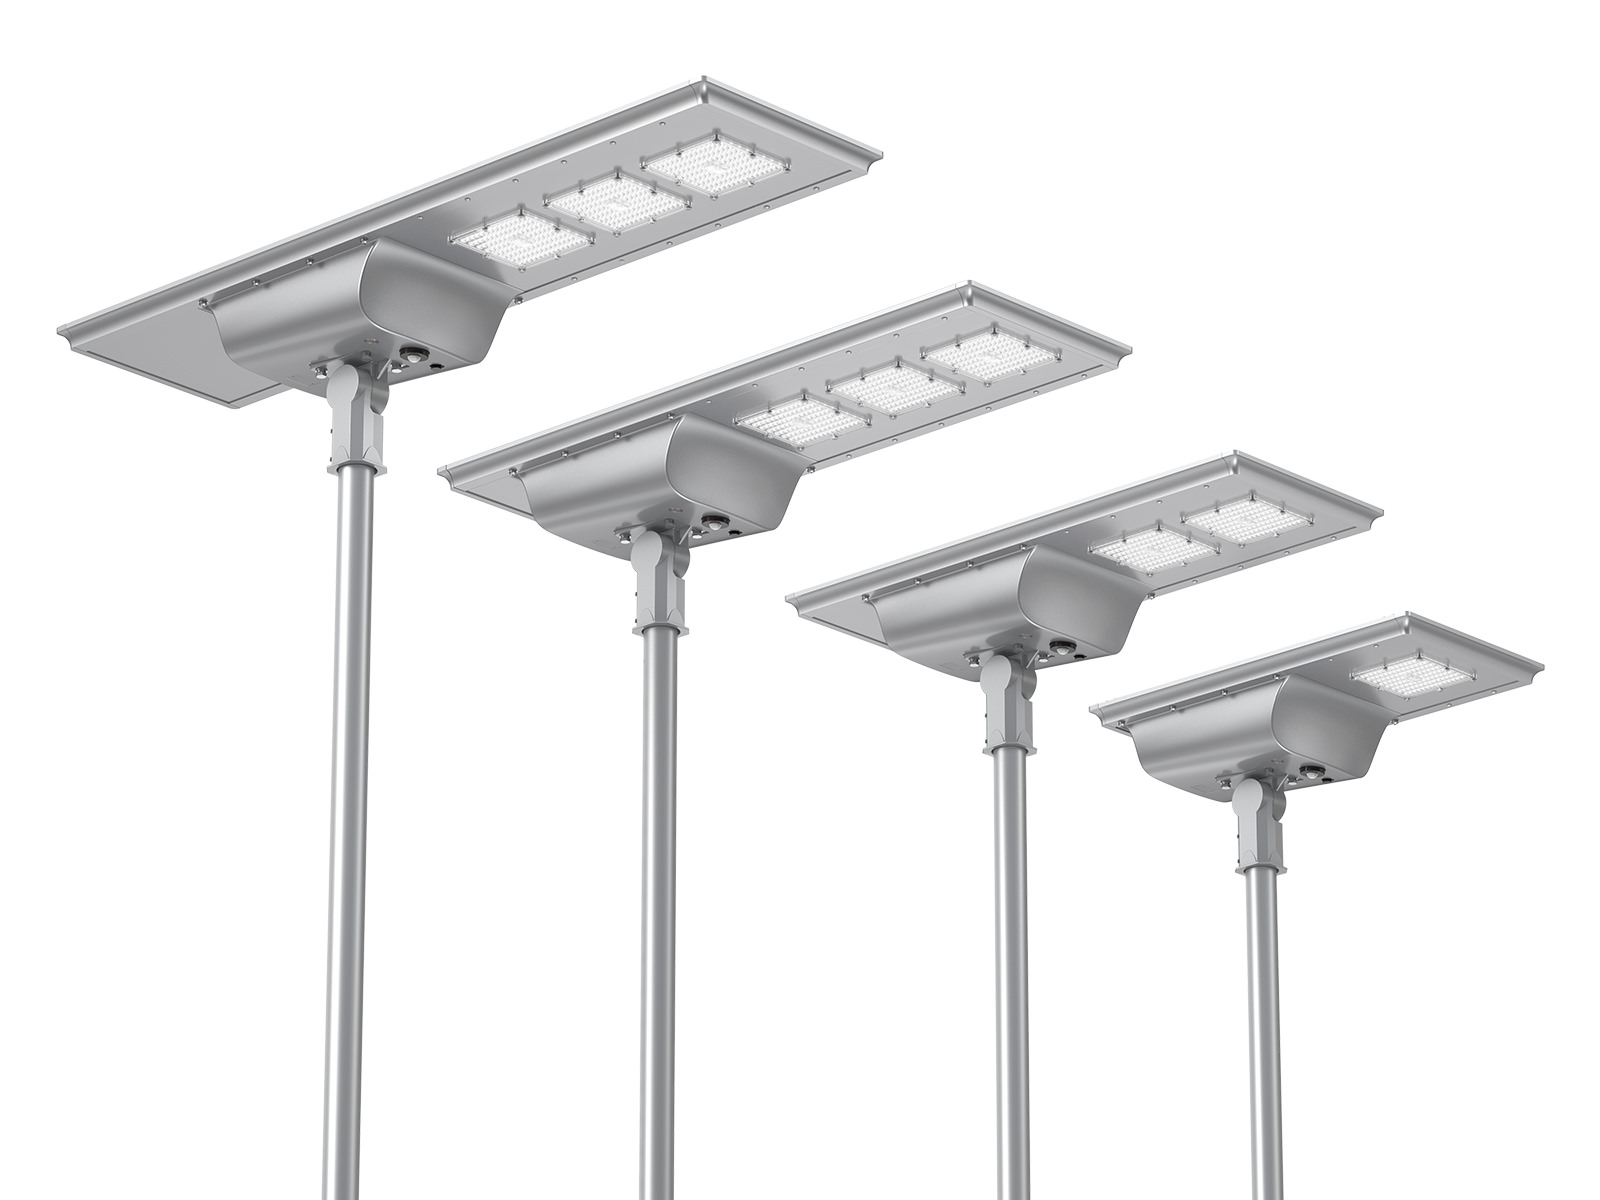 ST50 Integrated Solar Street Light For village streets, urban road, courtyard, parking lot